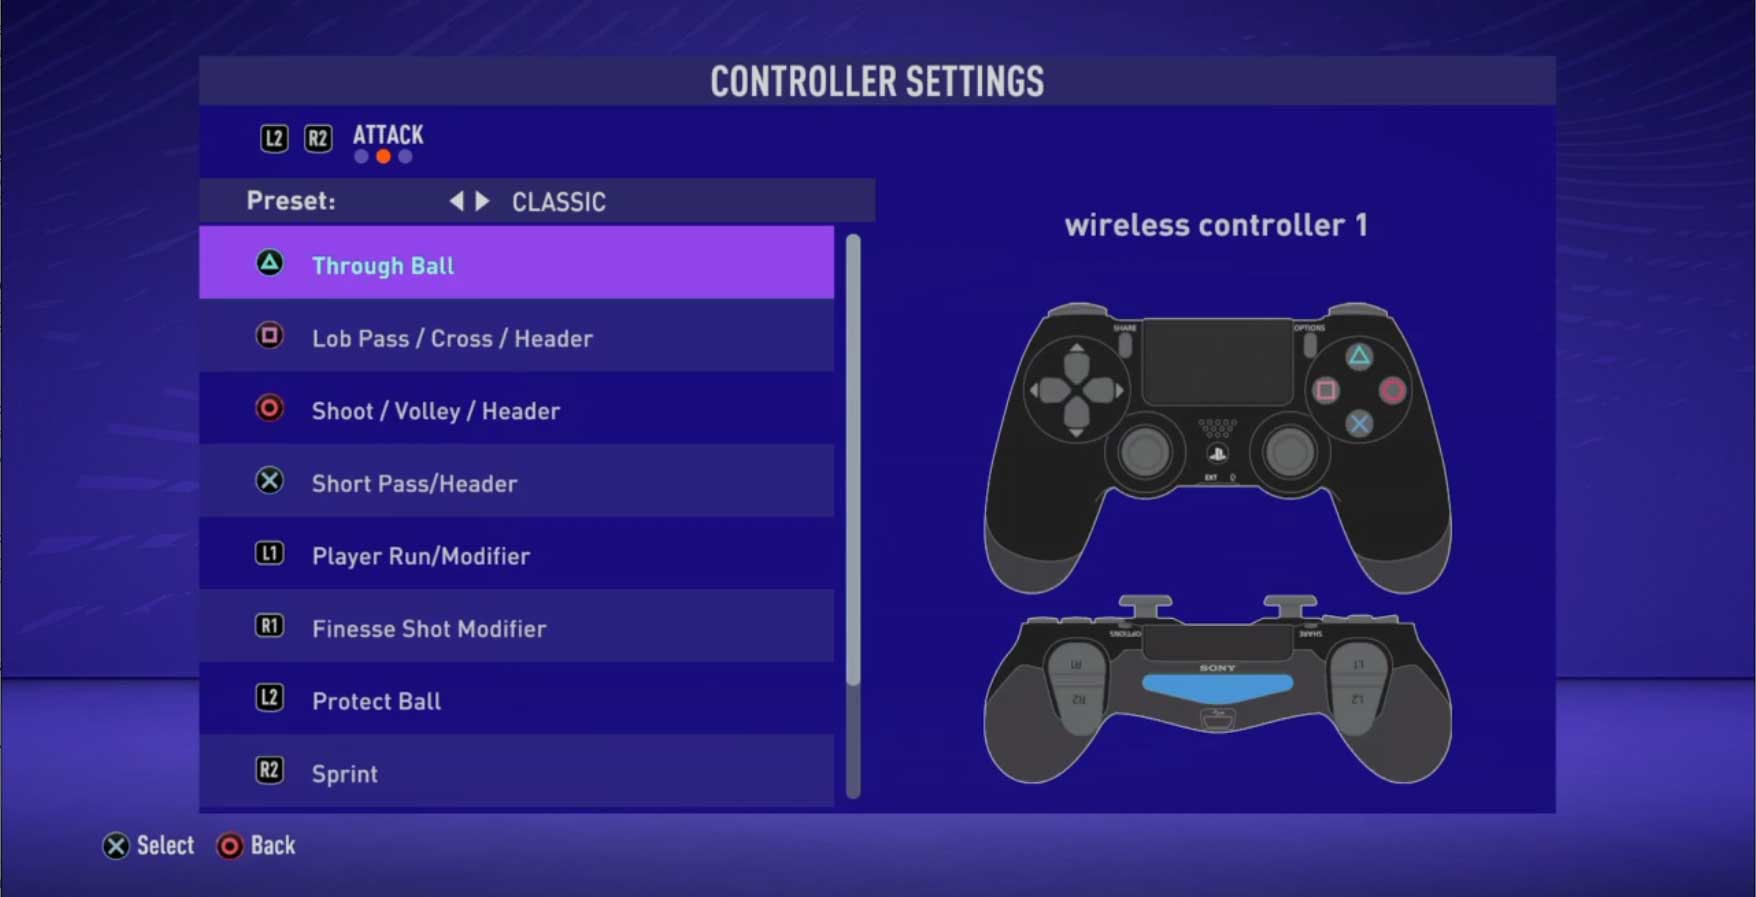 FIFAUTeam on "By default, controls are set for the classic configuration but you either choose between 3 controller configurations and select one do you want to use before each